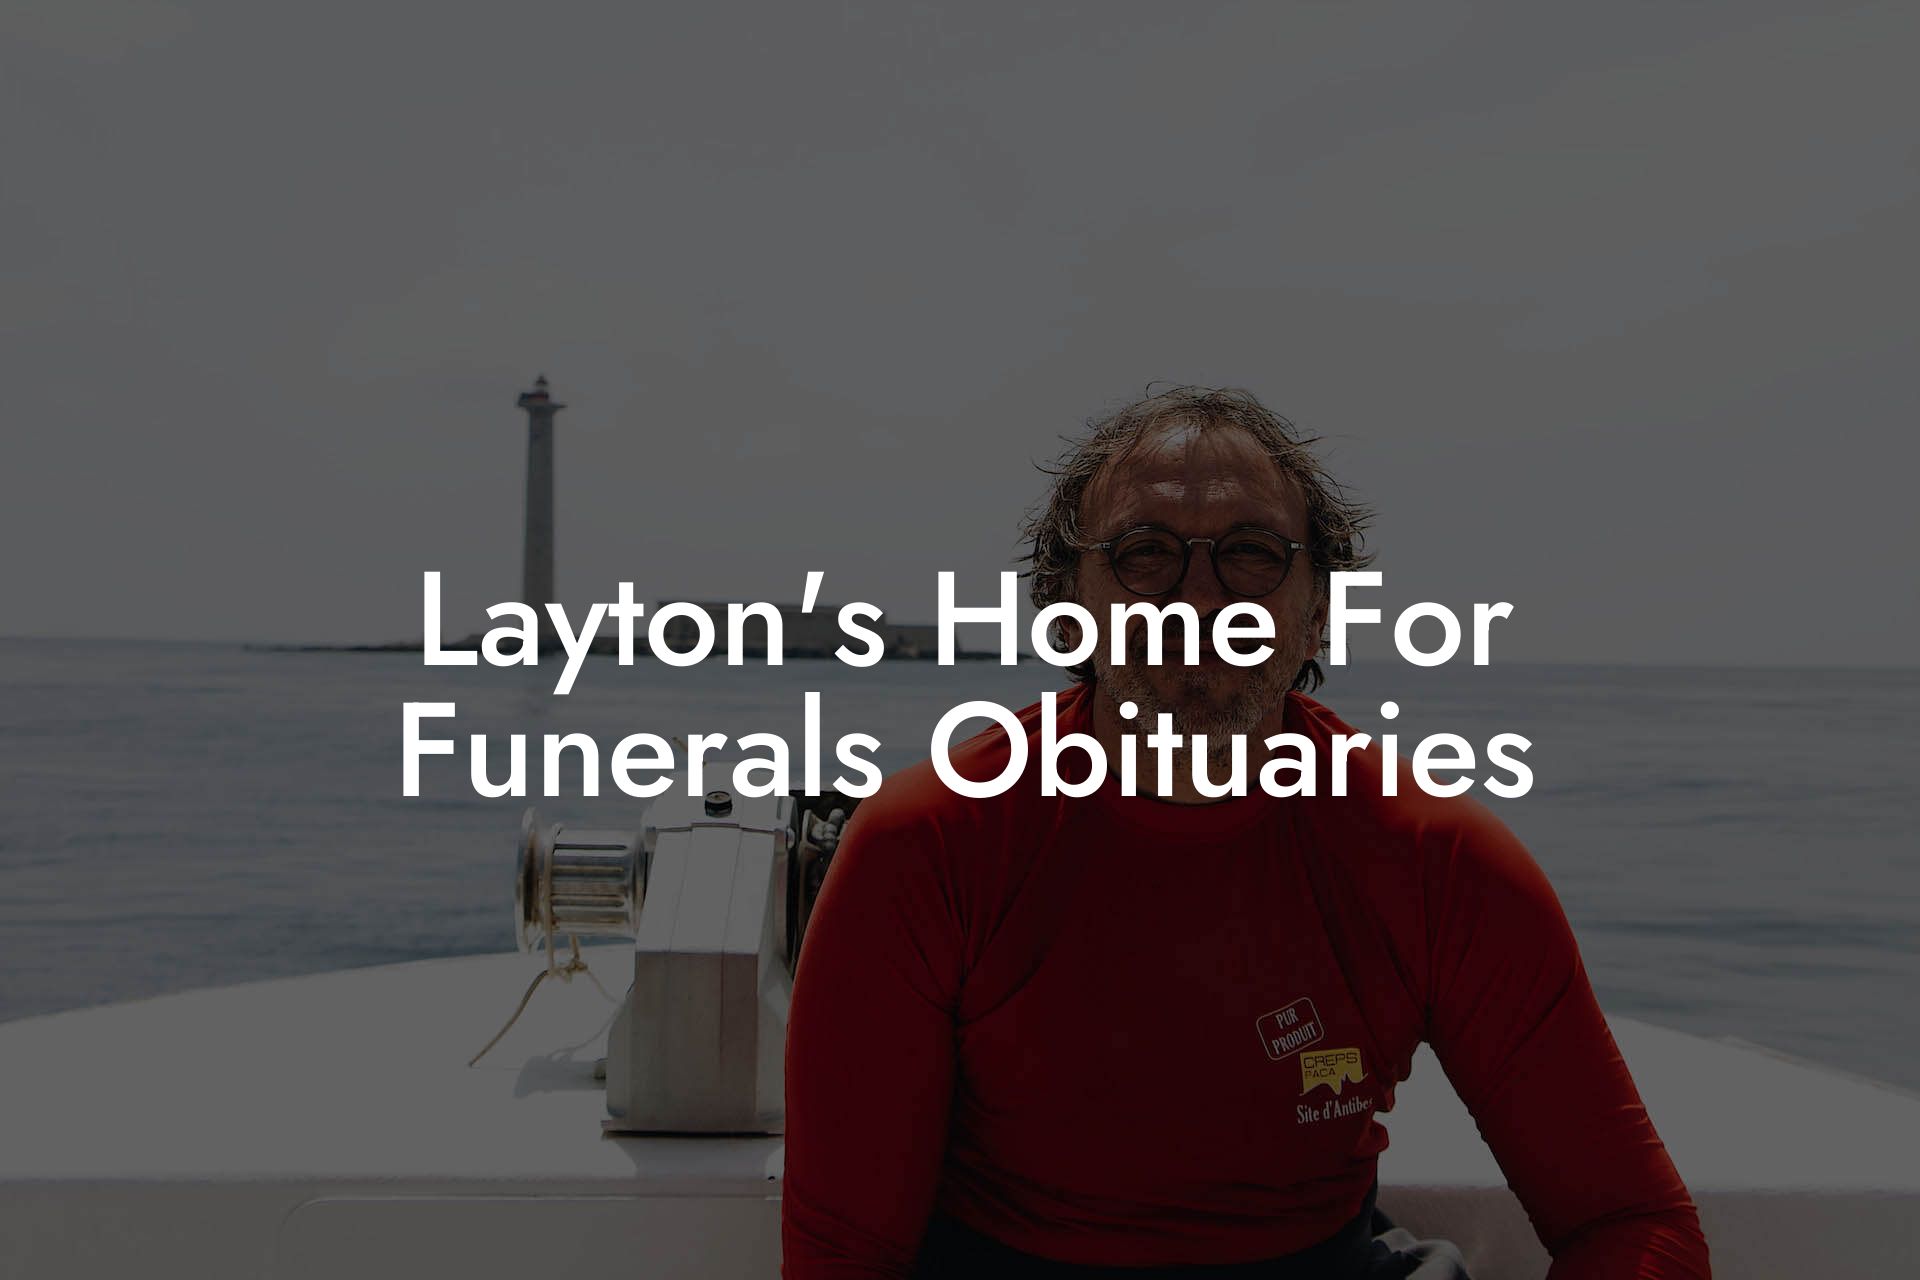 Layton's Home For Funerals Obituaries